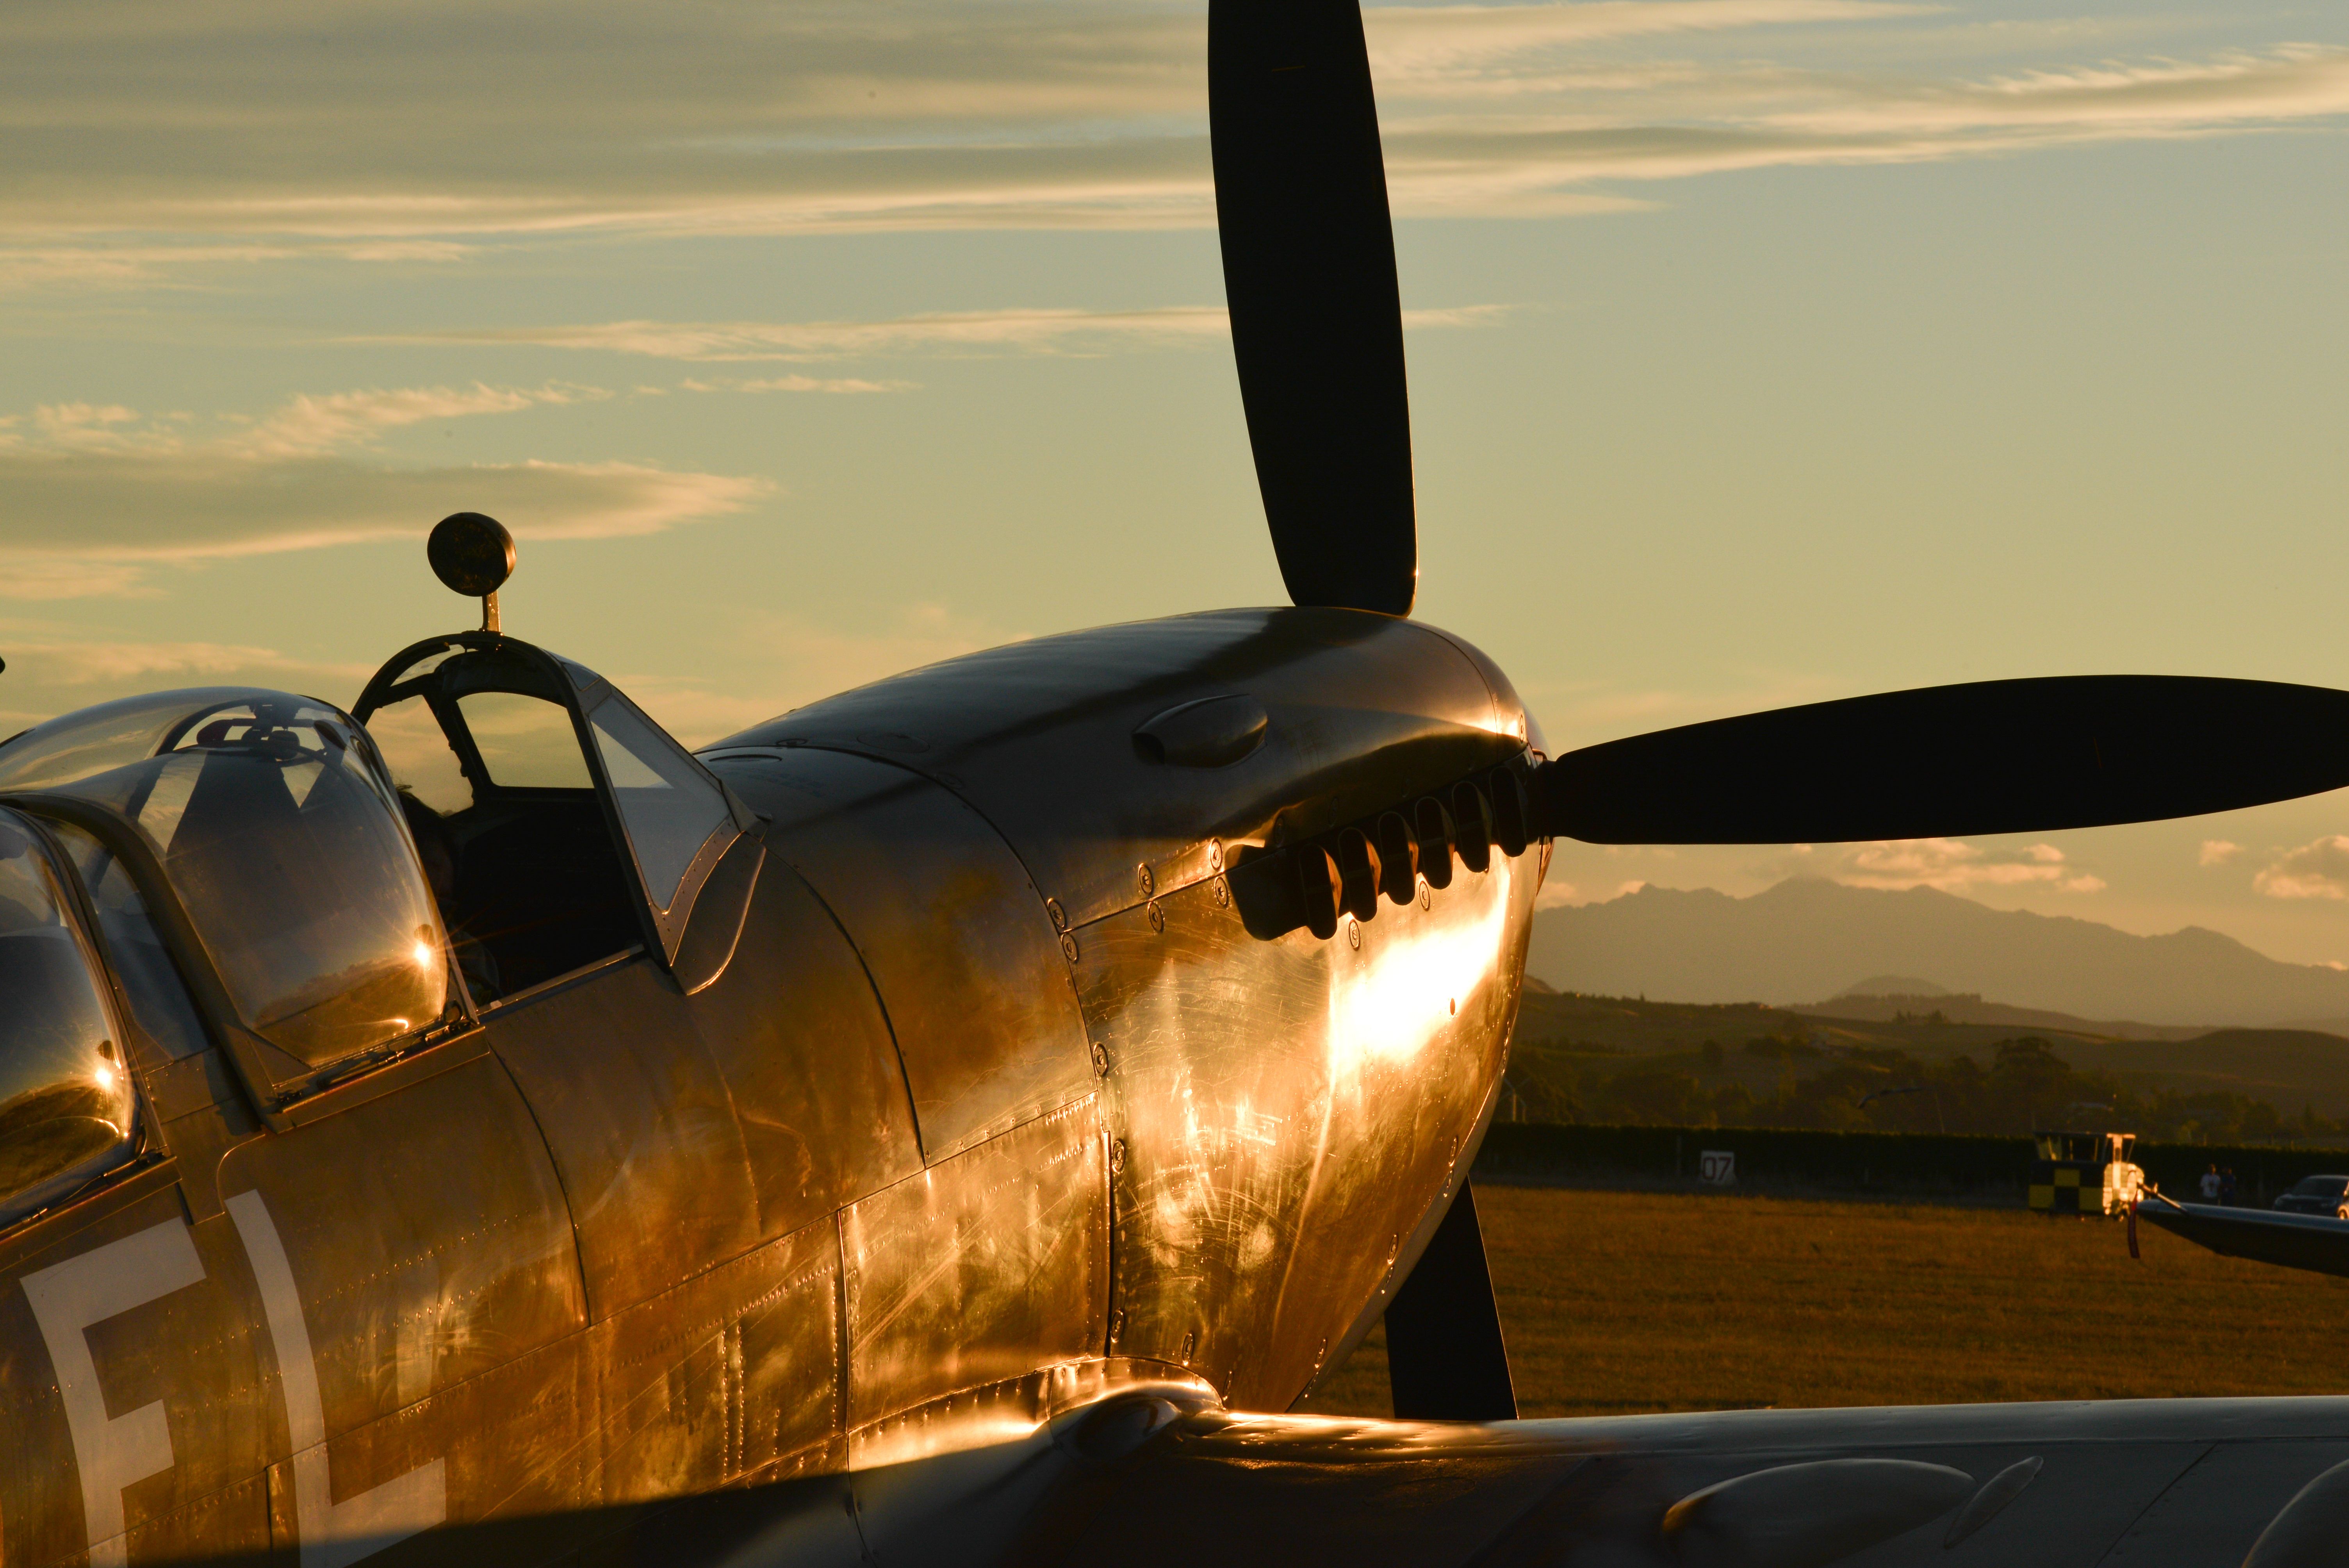 An aircraft parked during sunrise.